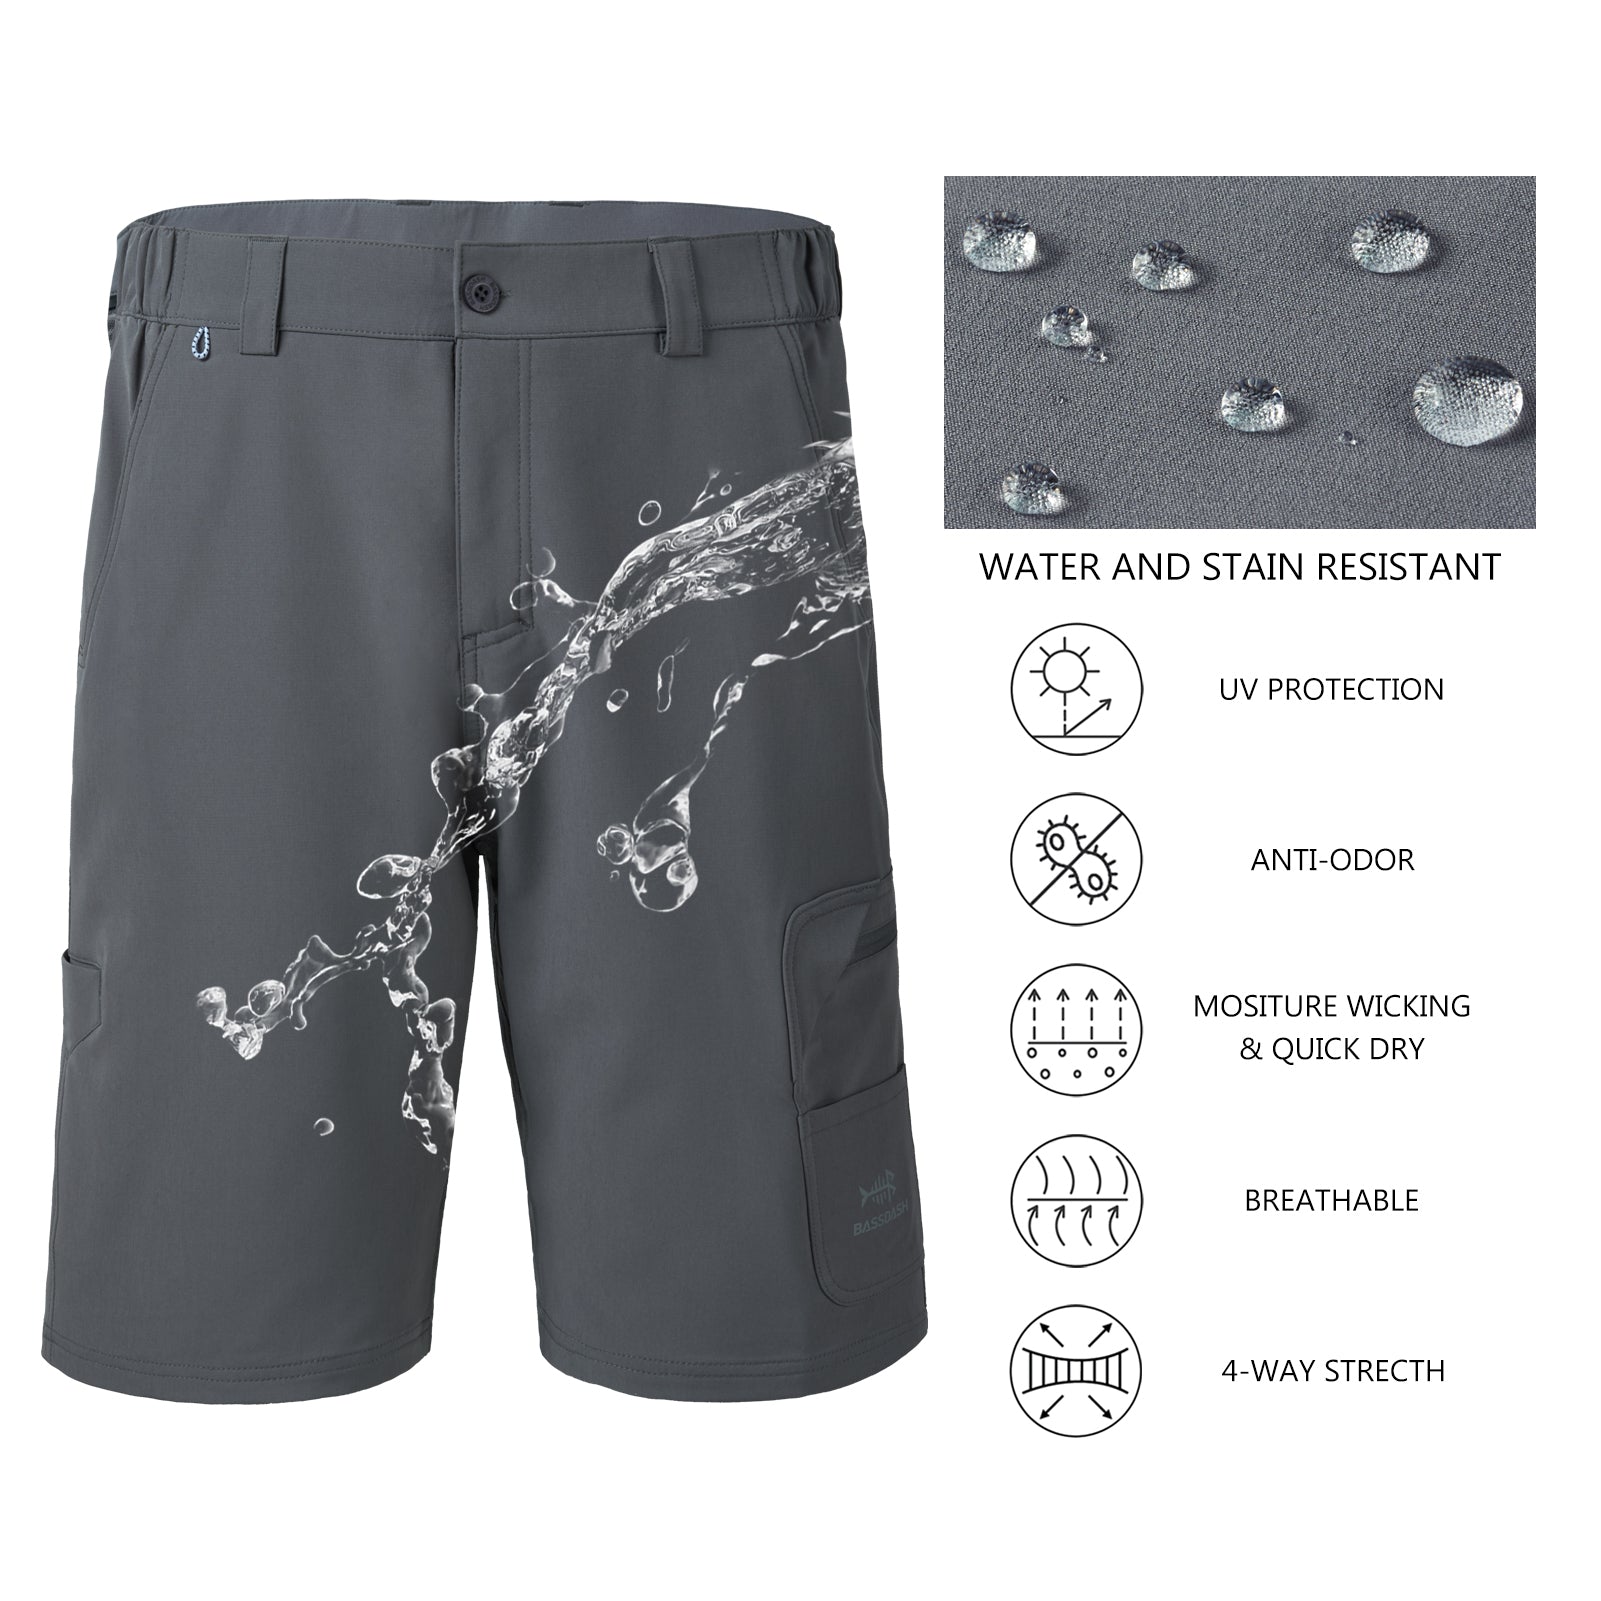 Men's Outdoor Cargo Shorts Waterproof Casual Shorts with Belt Classic Print  Relaxed Fit Hiking Fishing Shorts